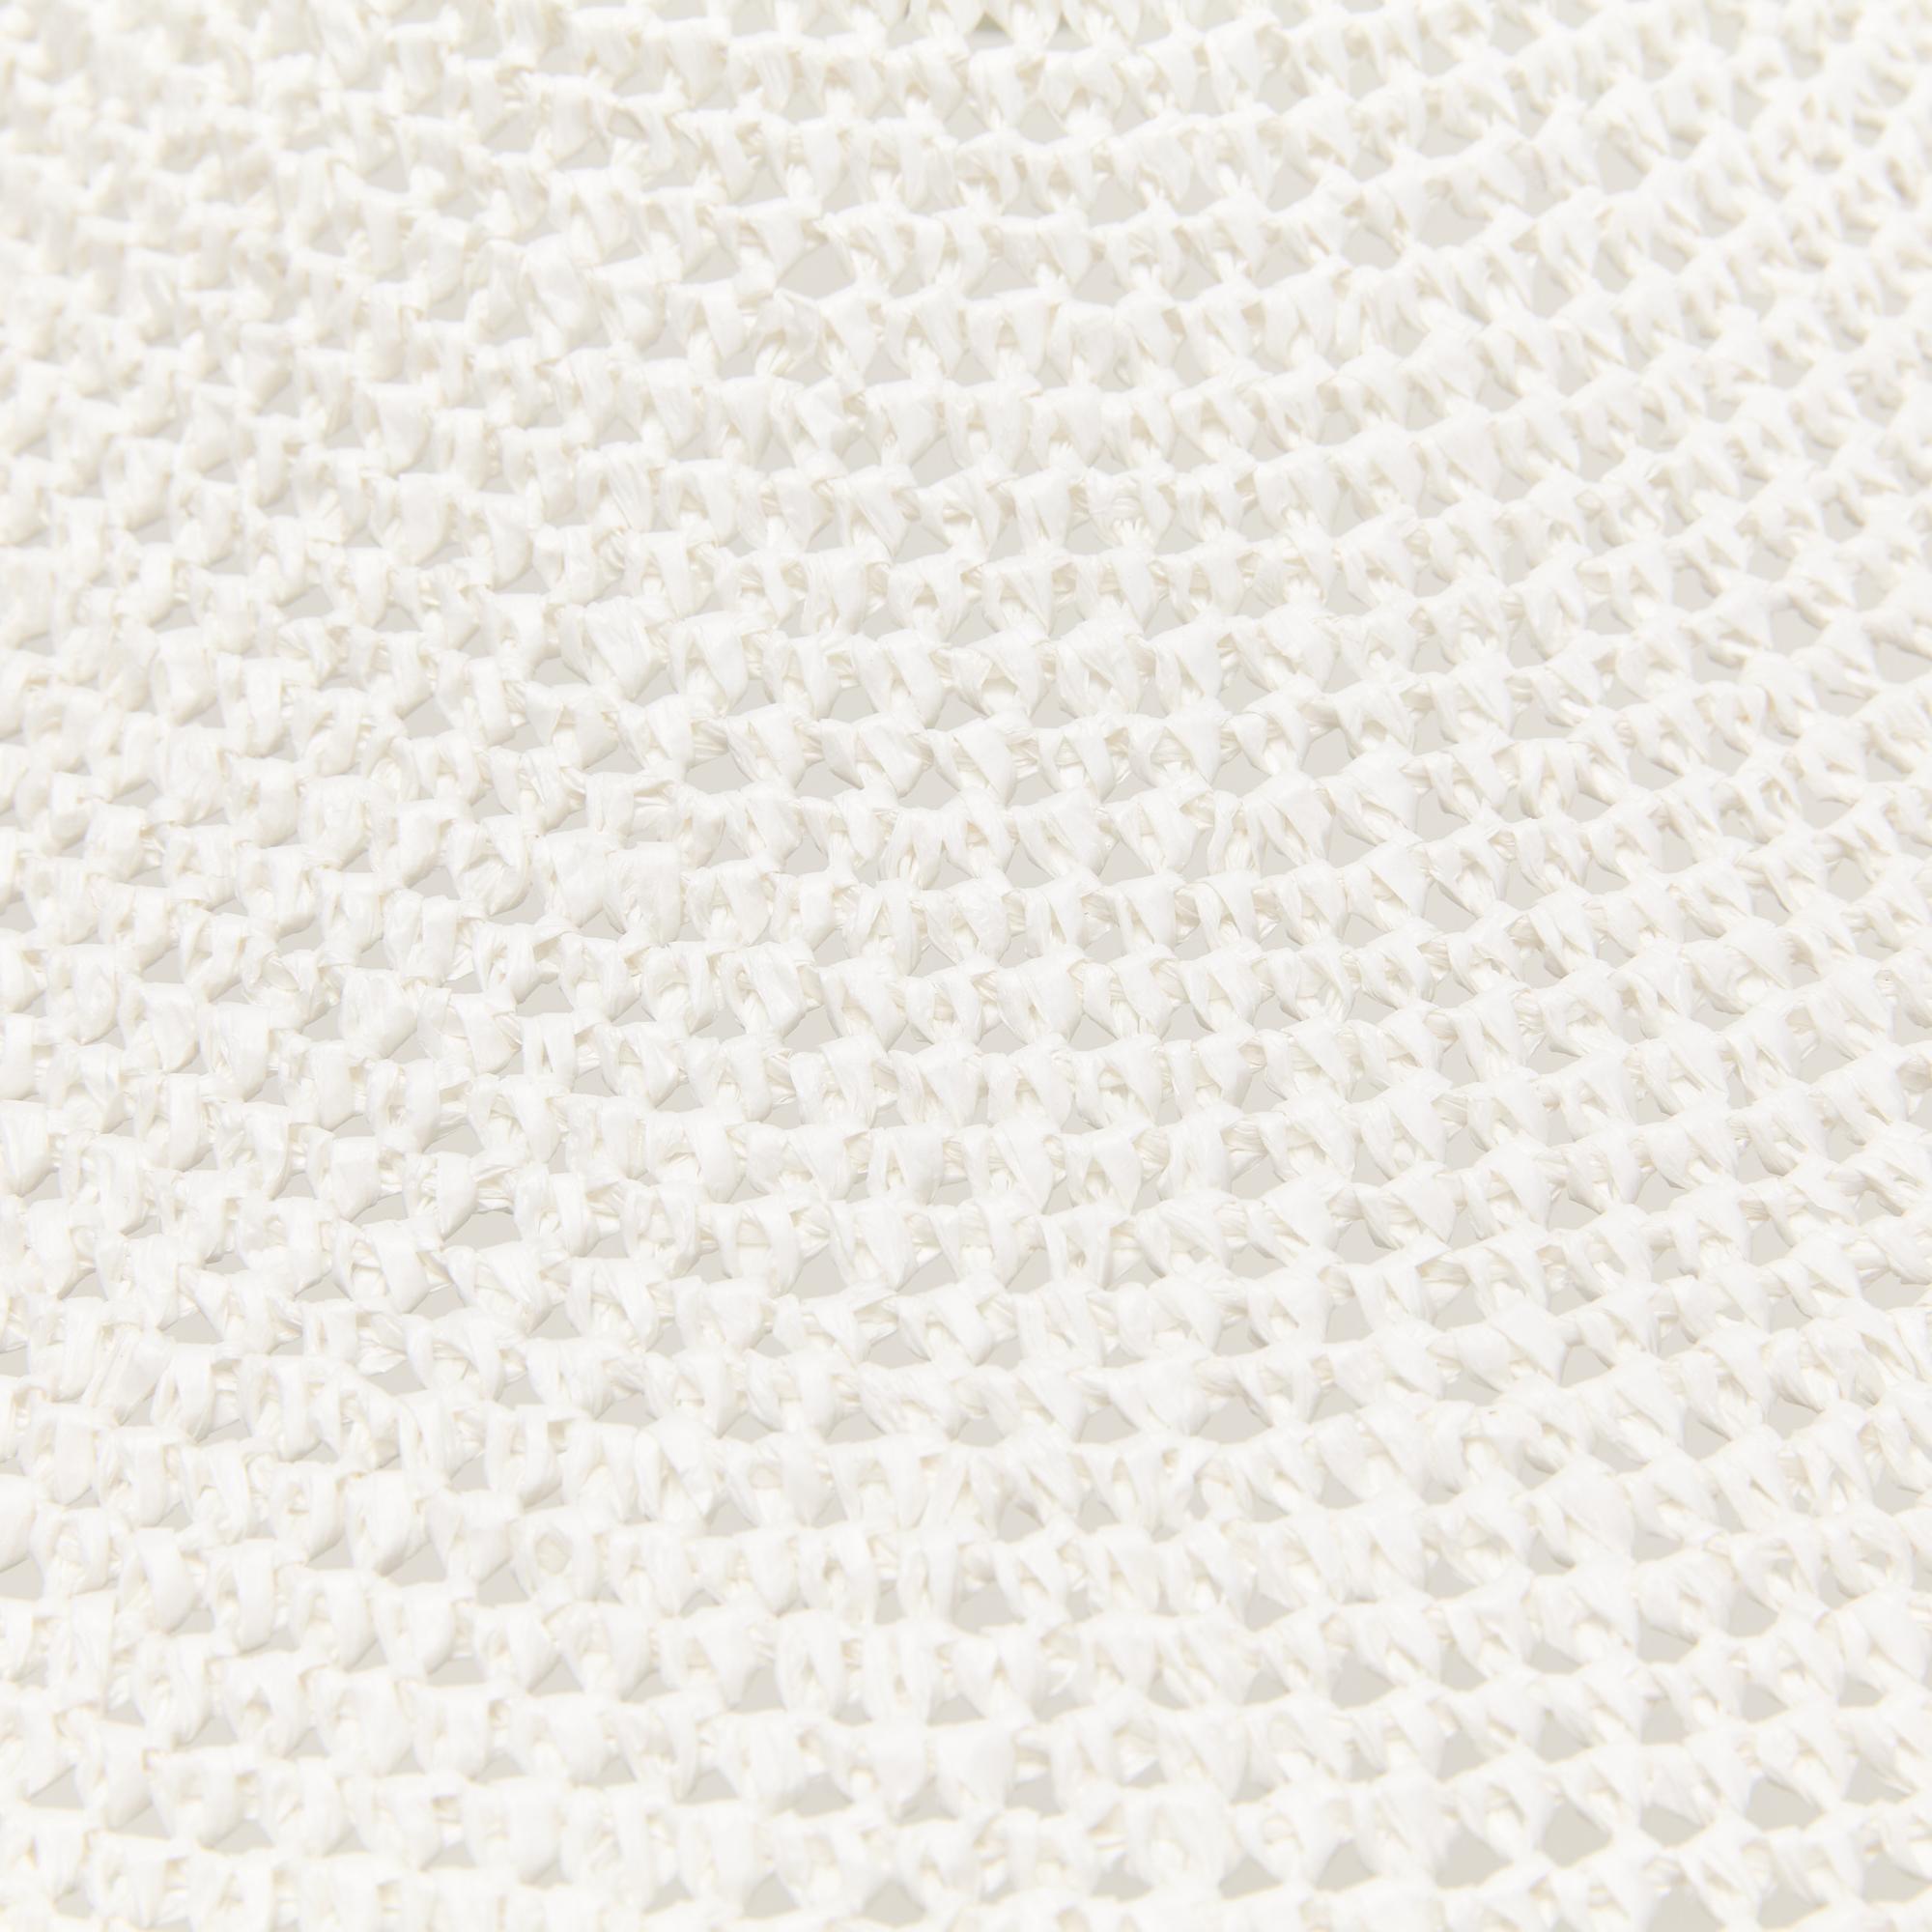 British SS01 Pendant Light Ø60cm/23.6in, Hand Crocheted in 100% Egyptian Cotton For Sale